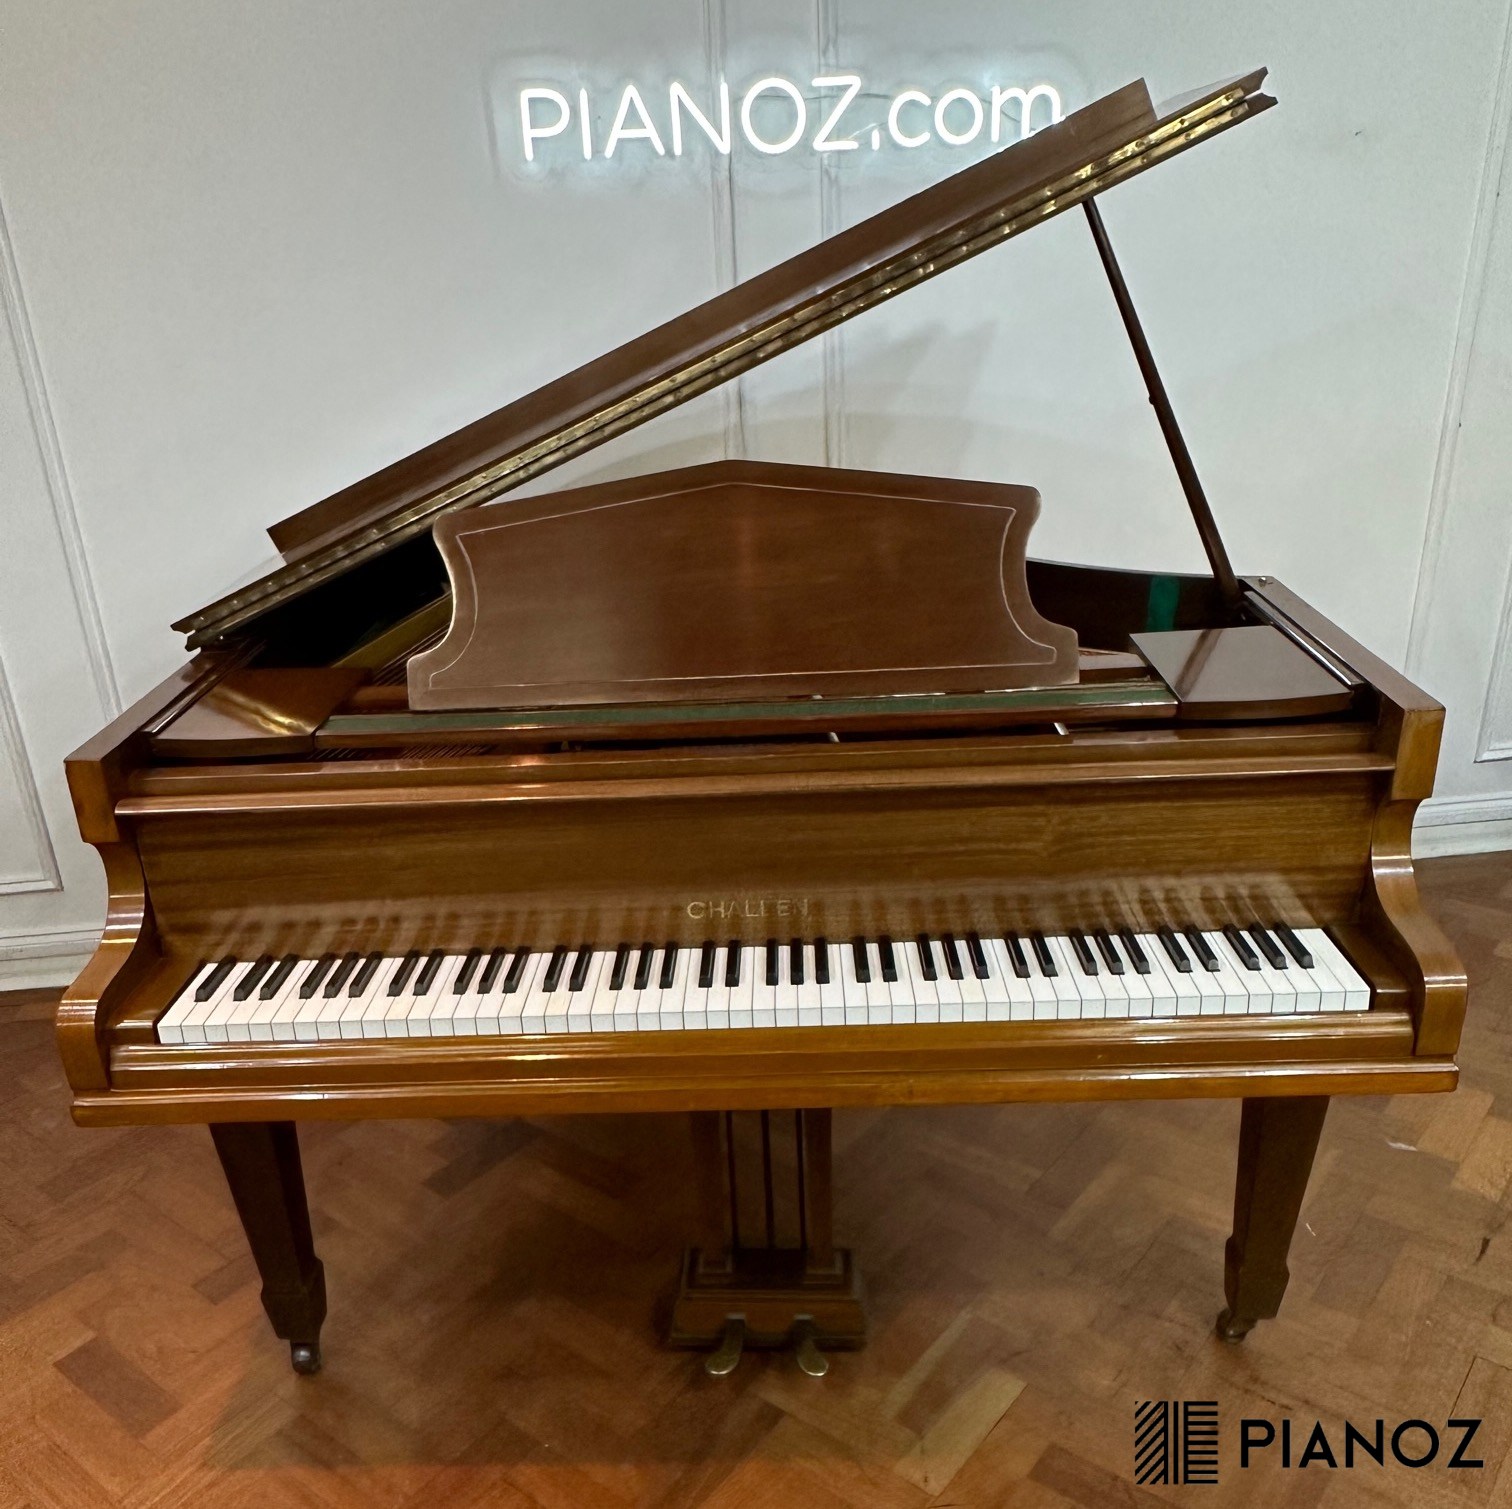 Challen Small Baby Grand Piano piano for sale in UK